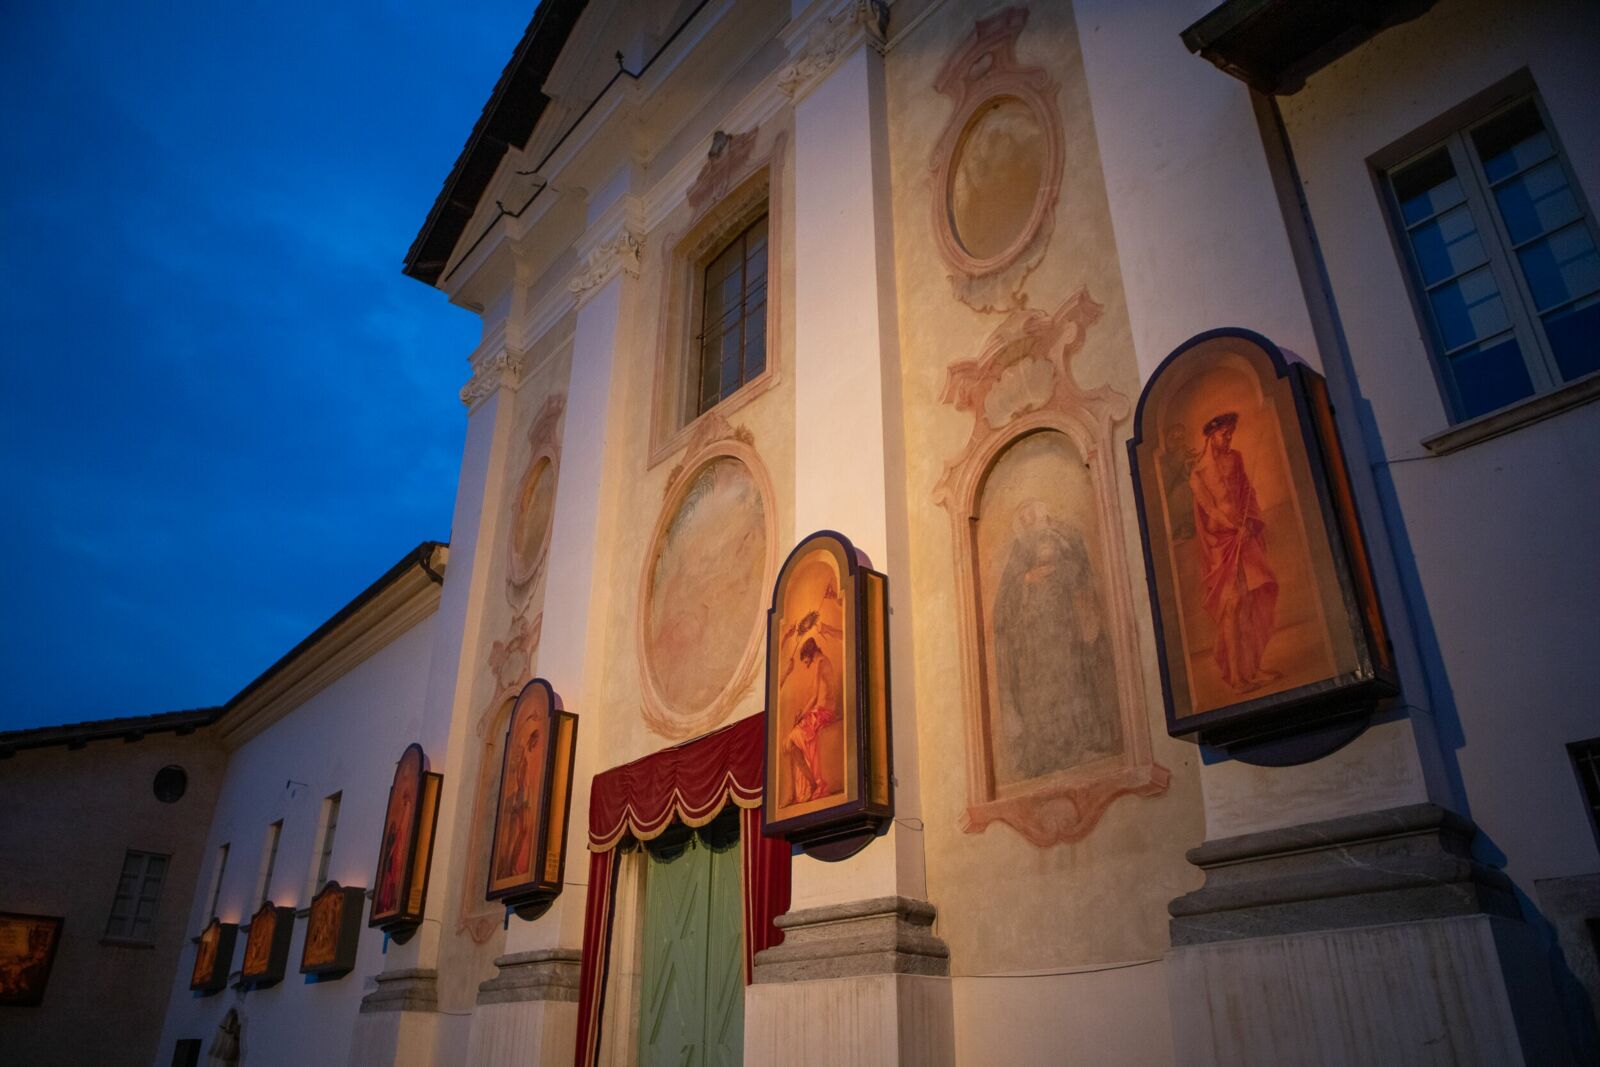 Holy Week Processions in Mendrisio, Virtual tour